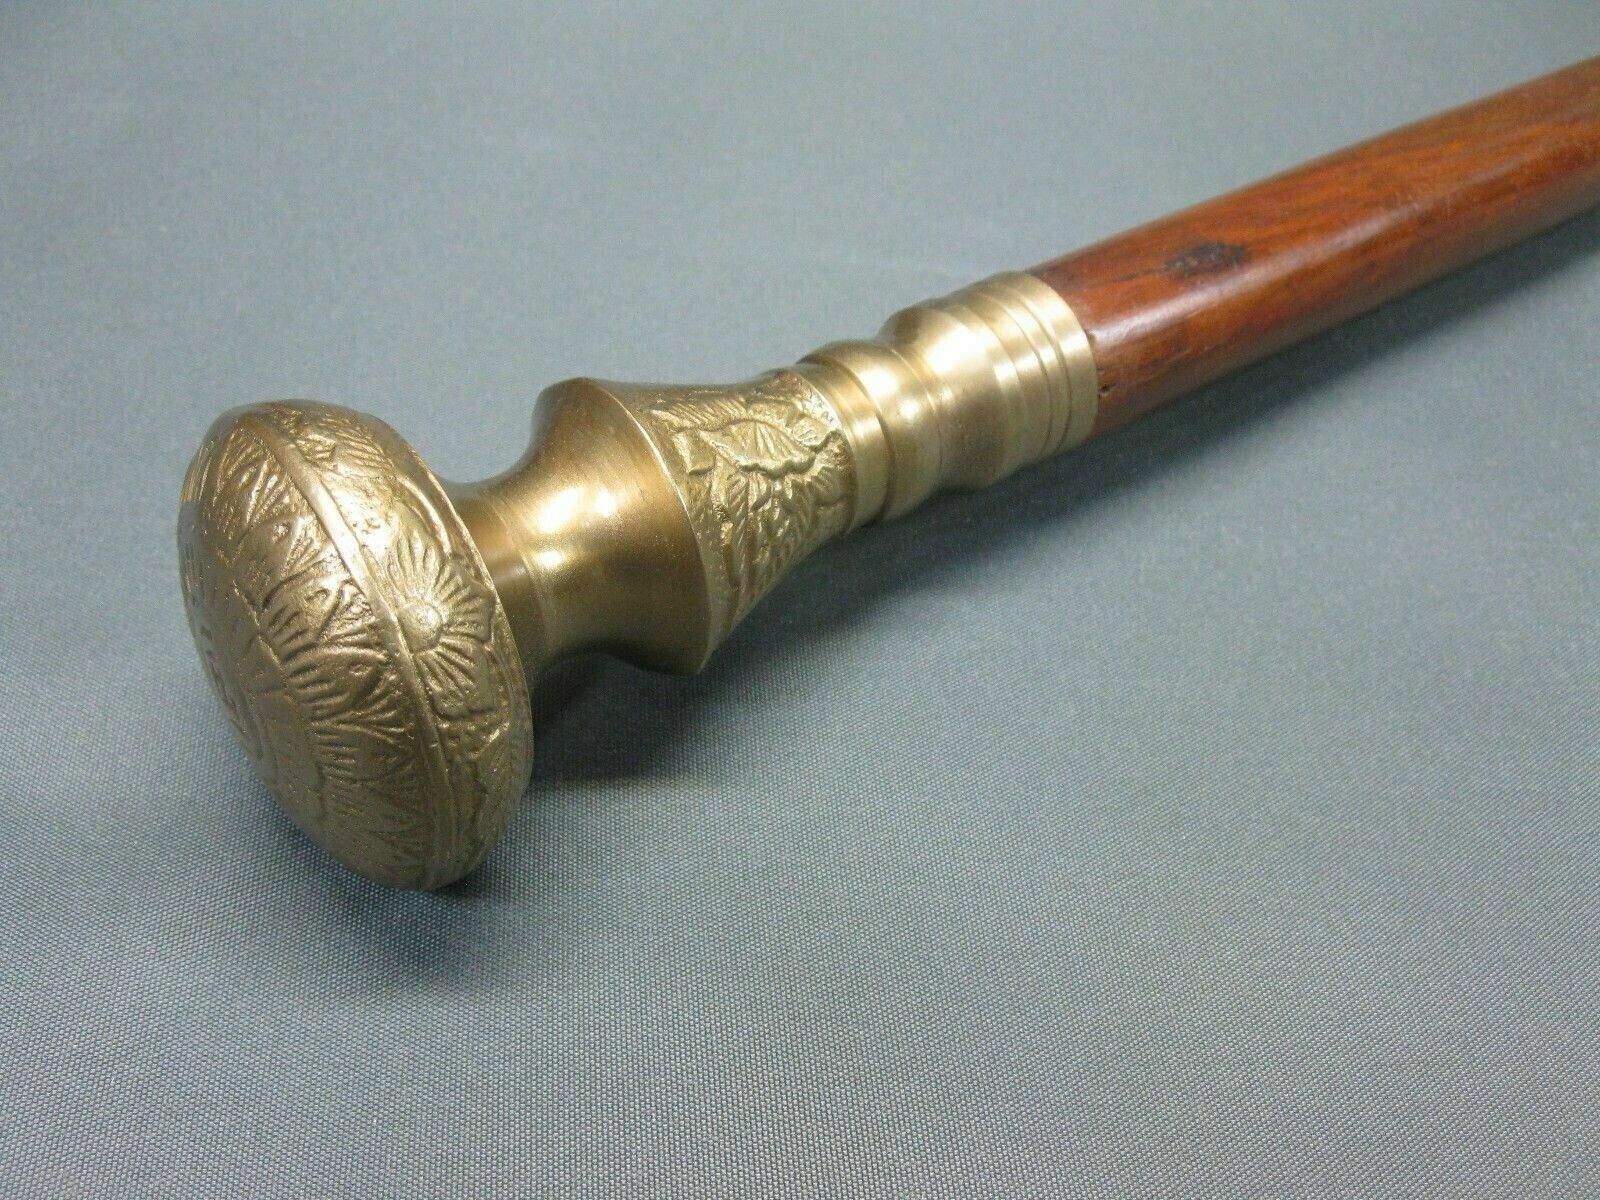 NEW SOLID ANTIQUE SOLID BRASS HANDLE WOODEN WALKI… - image 1